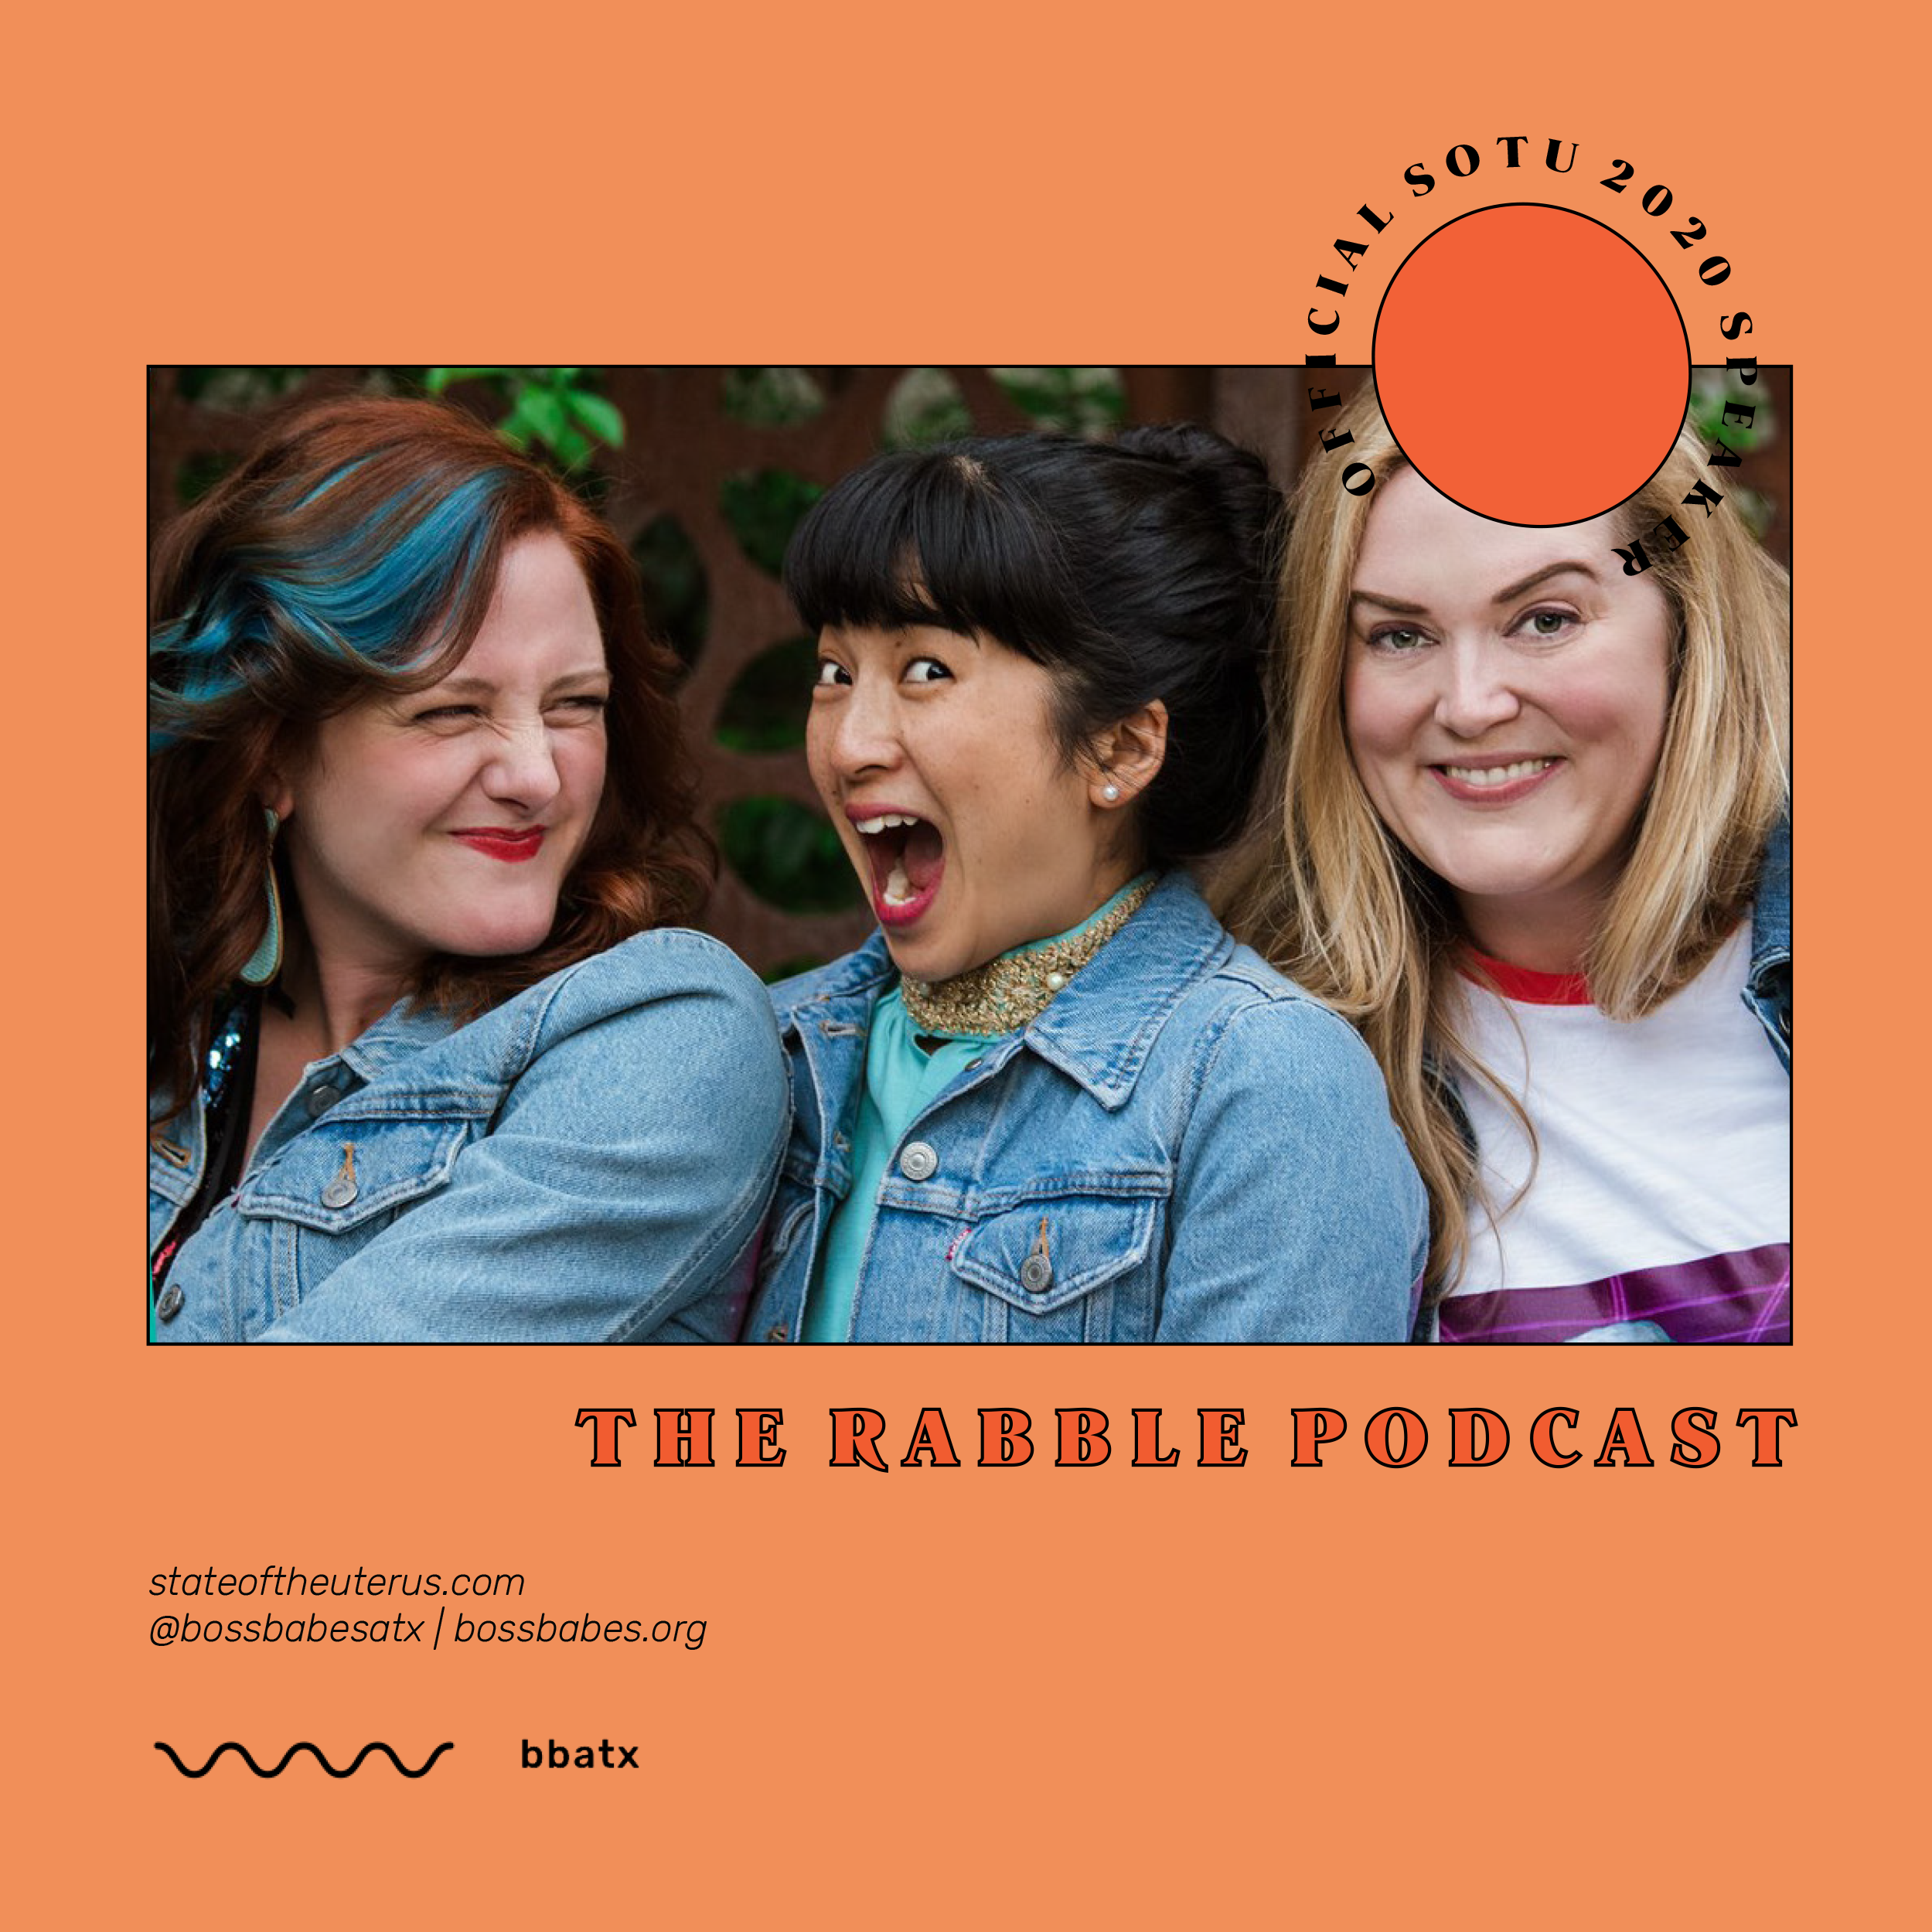 The Rabble Podcast